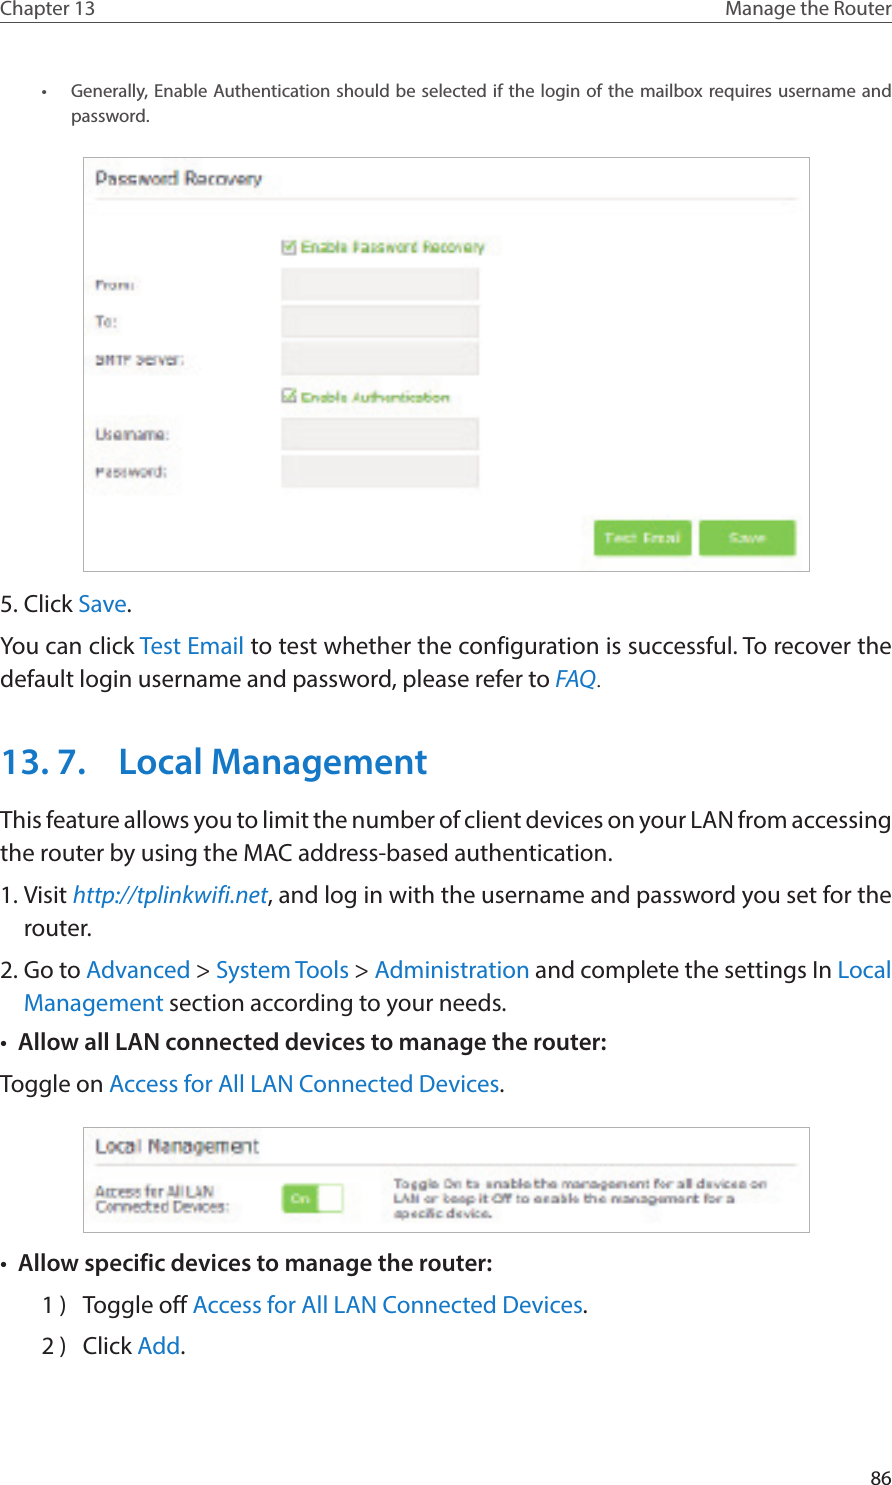 86Chapter 13 Manage the Router •  Generally, Enable Authentication should be selected if the login of the mailbox requires username and password. 5. Click Save.You can click Test Email to test whether the configuration is successful. To recover the default login username and password, please refer to FAQ.13. 7.  Local ManagementThis feature allows you to limit the number of client devices on your LAN from accessing the router by using the MAC address-based authentication.1. Visit http://tplinkwifi.net, and log in with the username and password you set for the router.2. Go to Advanced &gt; System Tools &gt; Administration and complete the settings In Local Management section according to your needs.•  Allow all LAN connected devices to manage the router: Toggle on Access for All LAN Connected Devices.•  Allow specific devices to manage the router: 1 )  Toggle off Access for All LAN Connected Devices.2 )  Click Add.